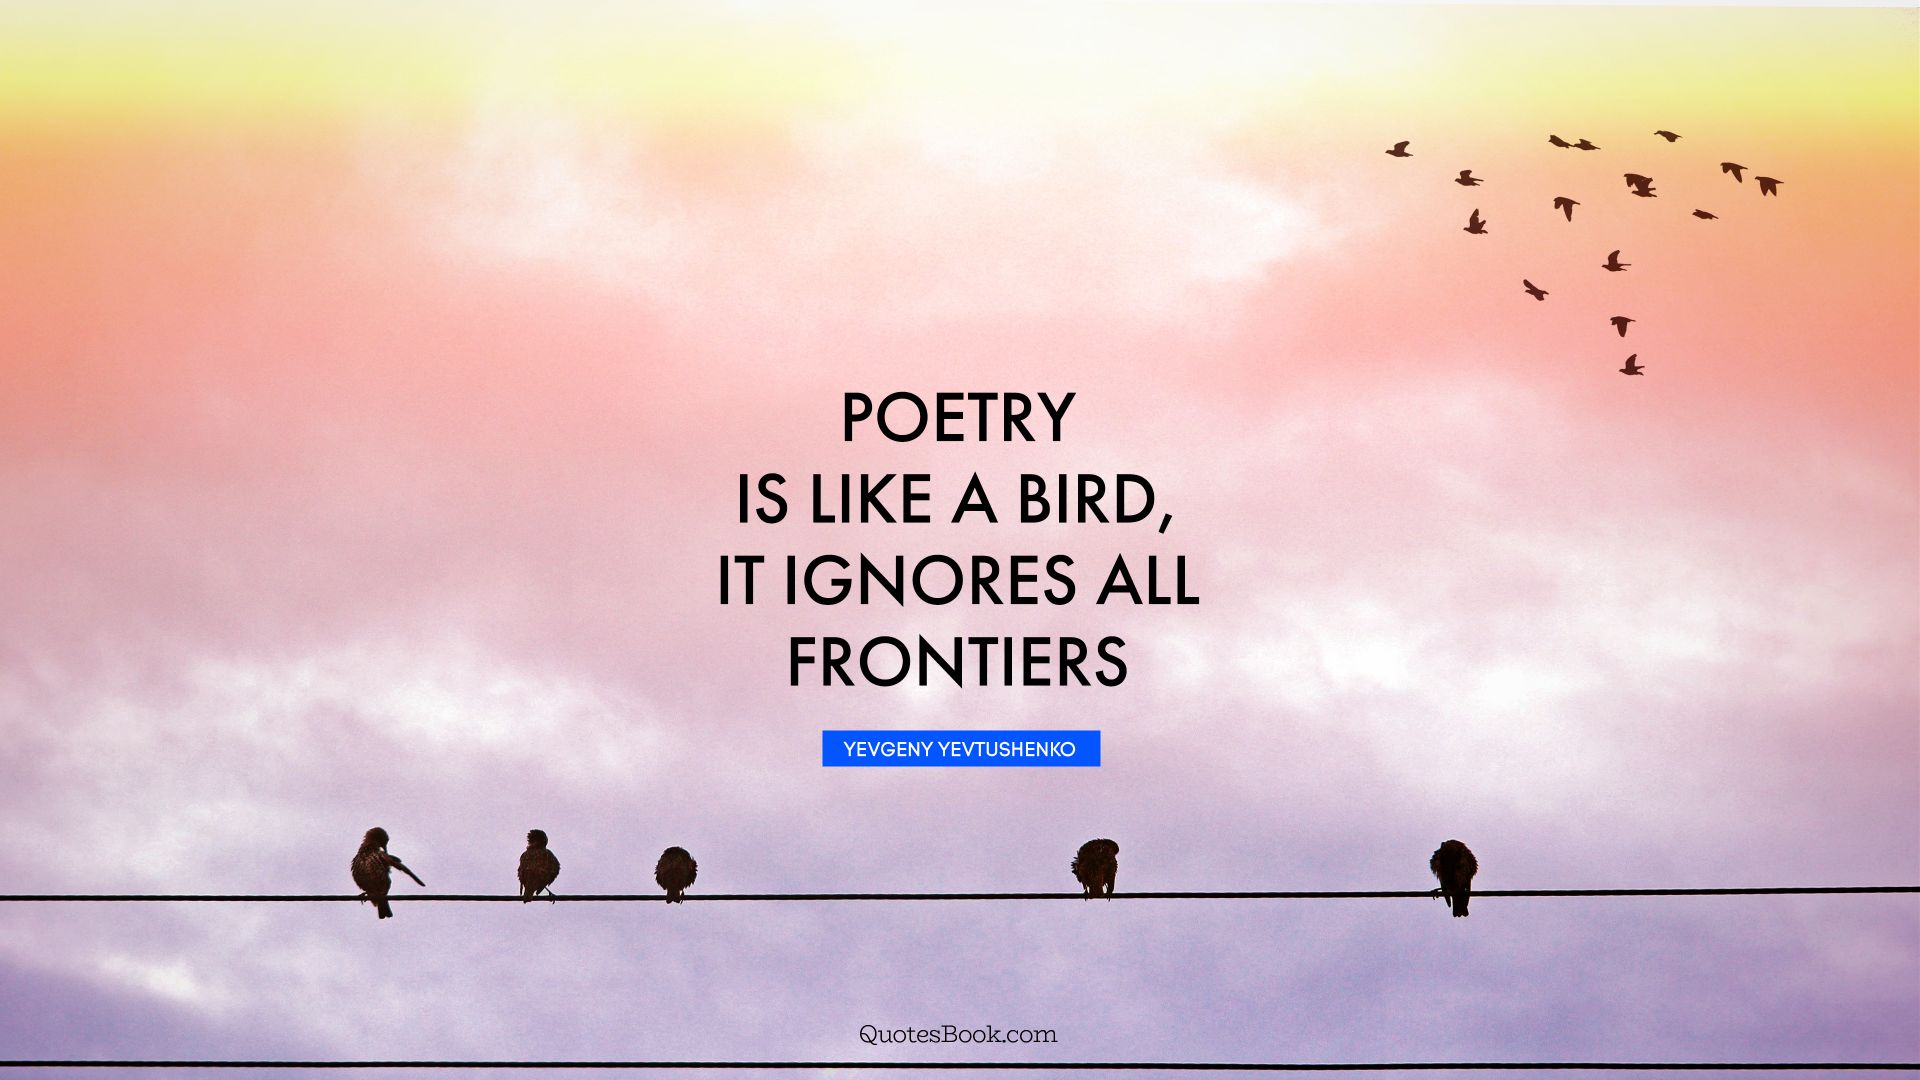 Poetry is like a bird, it ignores all frontiers. - Quote by Yevgeny Yevtushenko